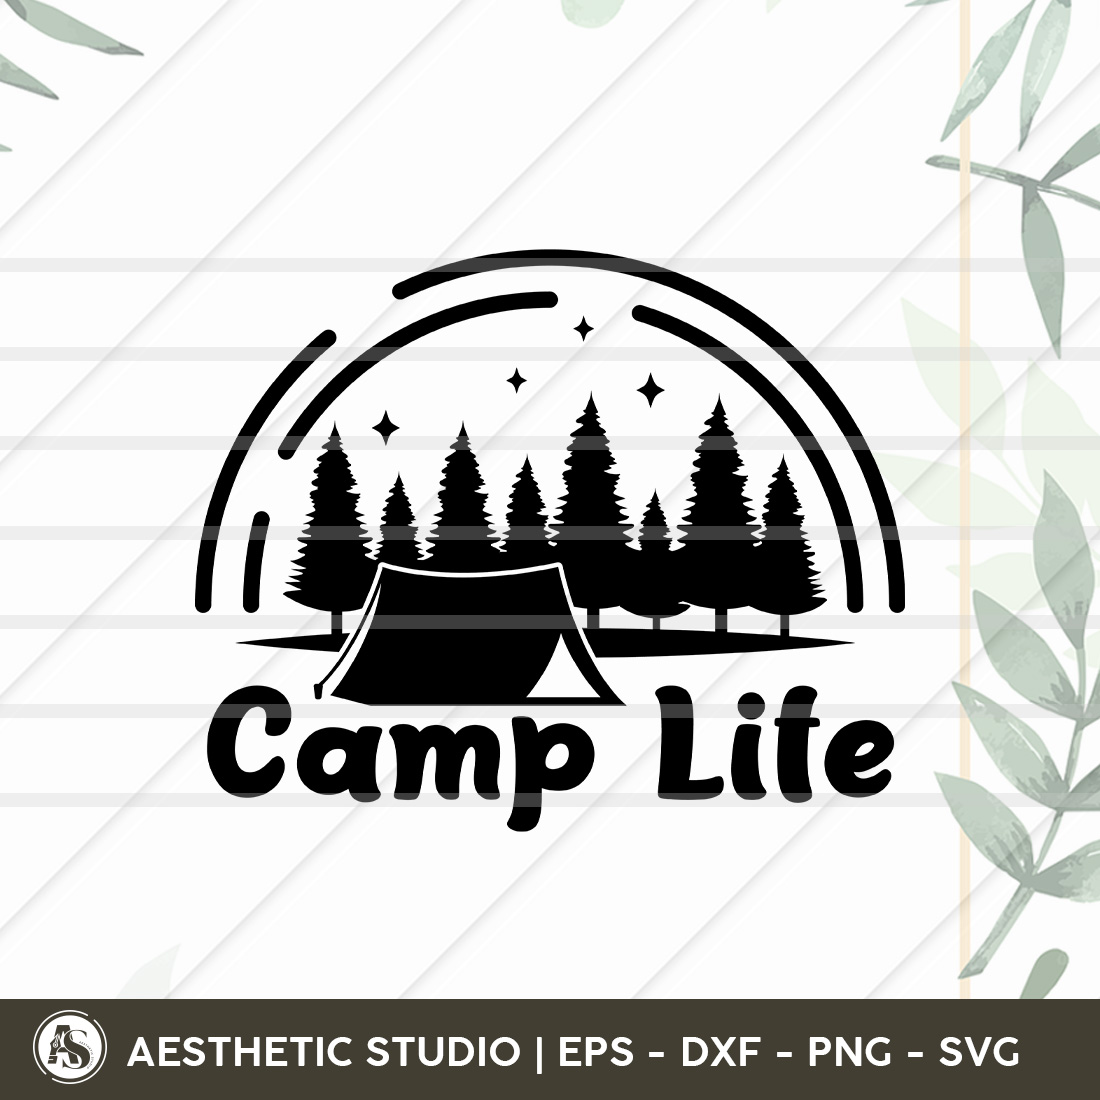 Camp Life, Camper, Adventure, Camp Life, Camping Svg, Typography, Camping Quotes, Camping Cut File, Funny Camping, Camping T-shirt Design, Svg, Eps, Dxf, Png, Cut file cover image.